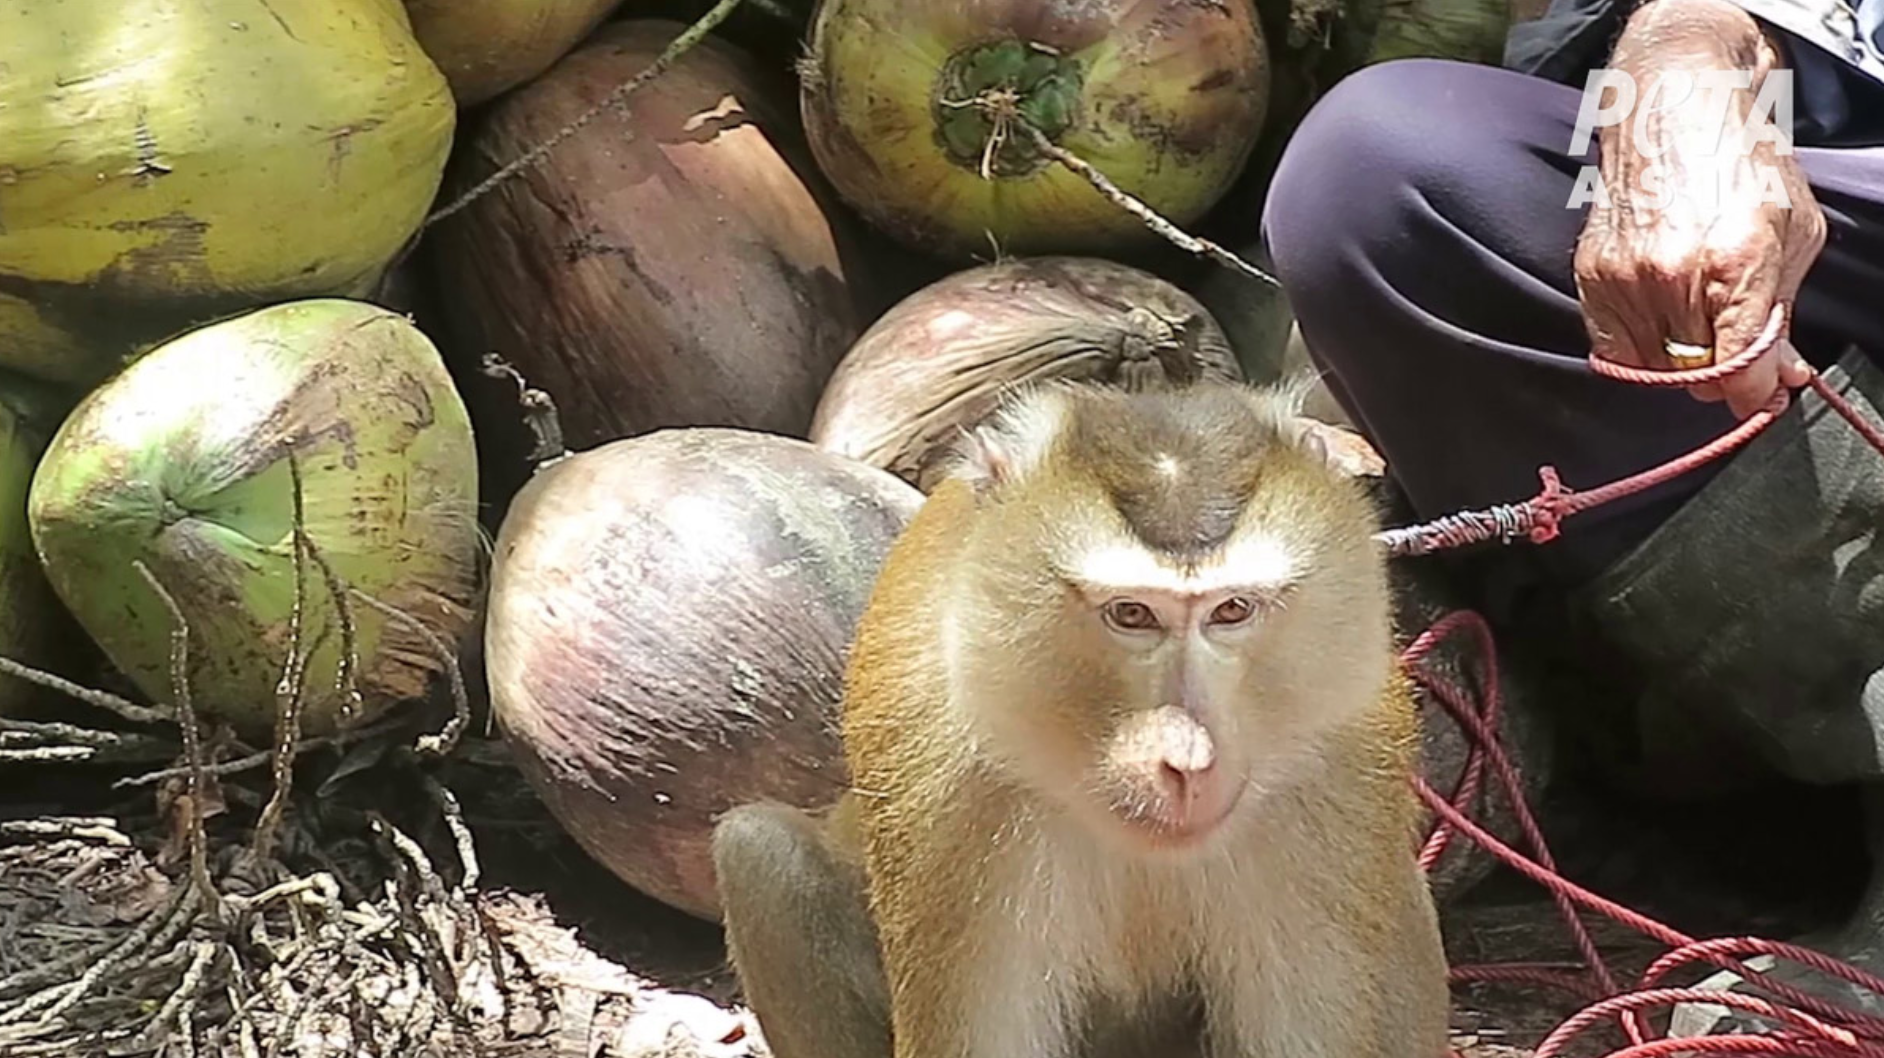 Peta Asia investigation alleges use of monkeys as forced labour